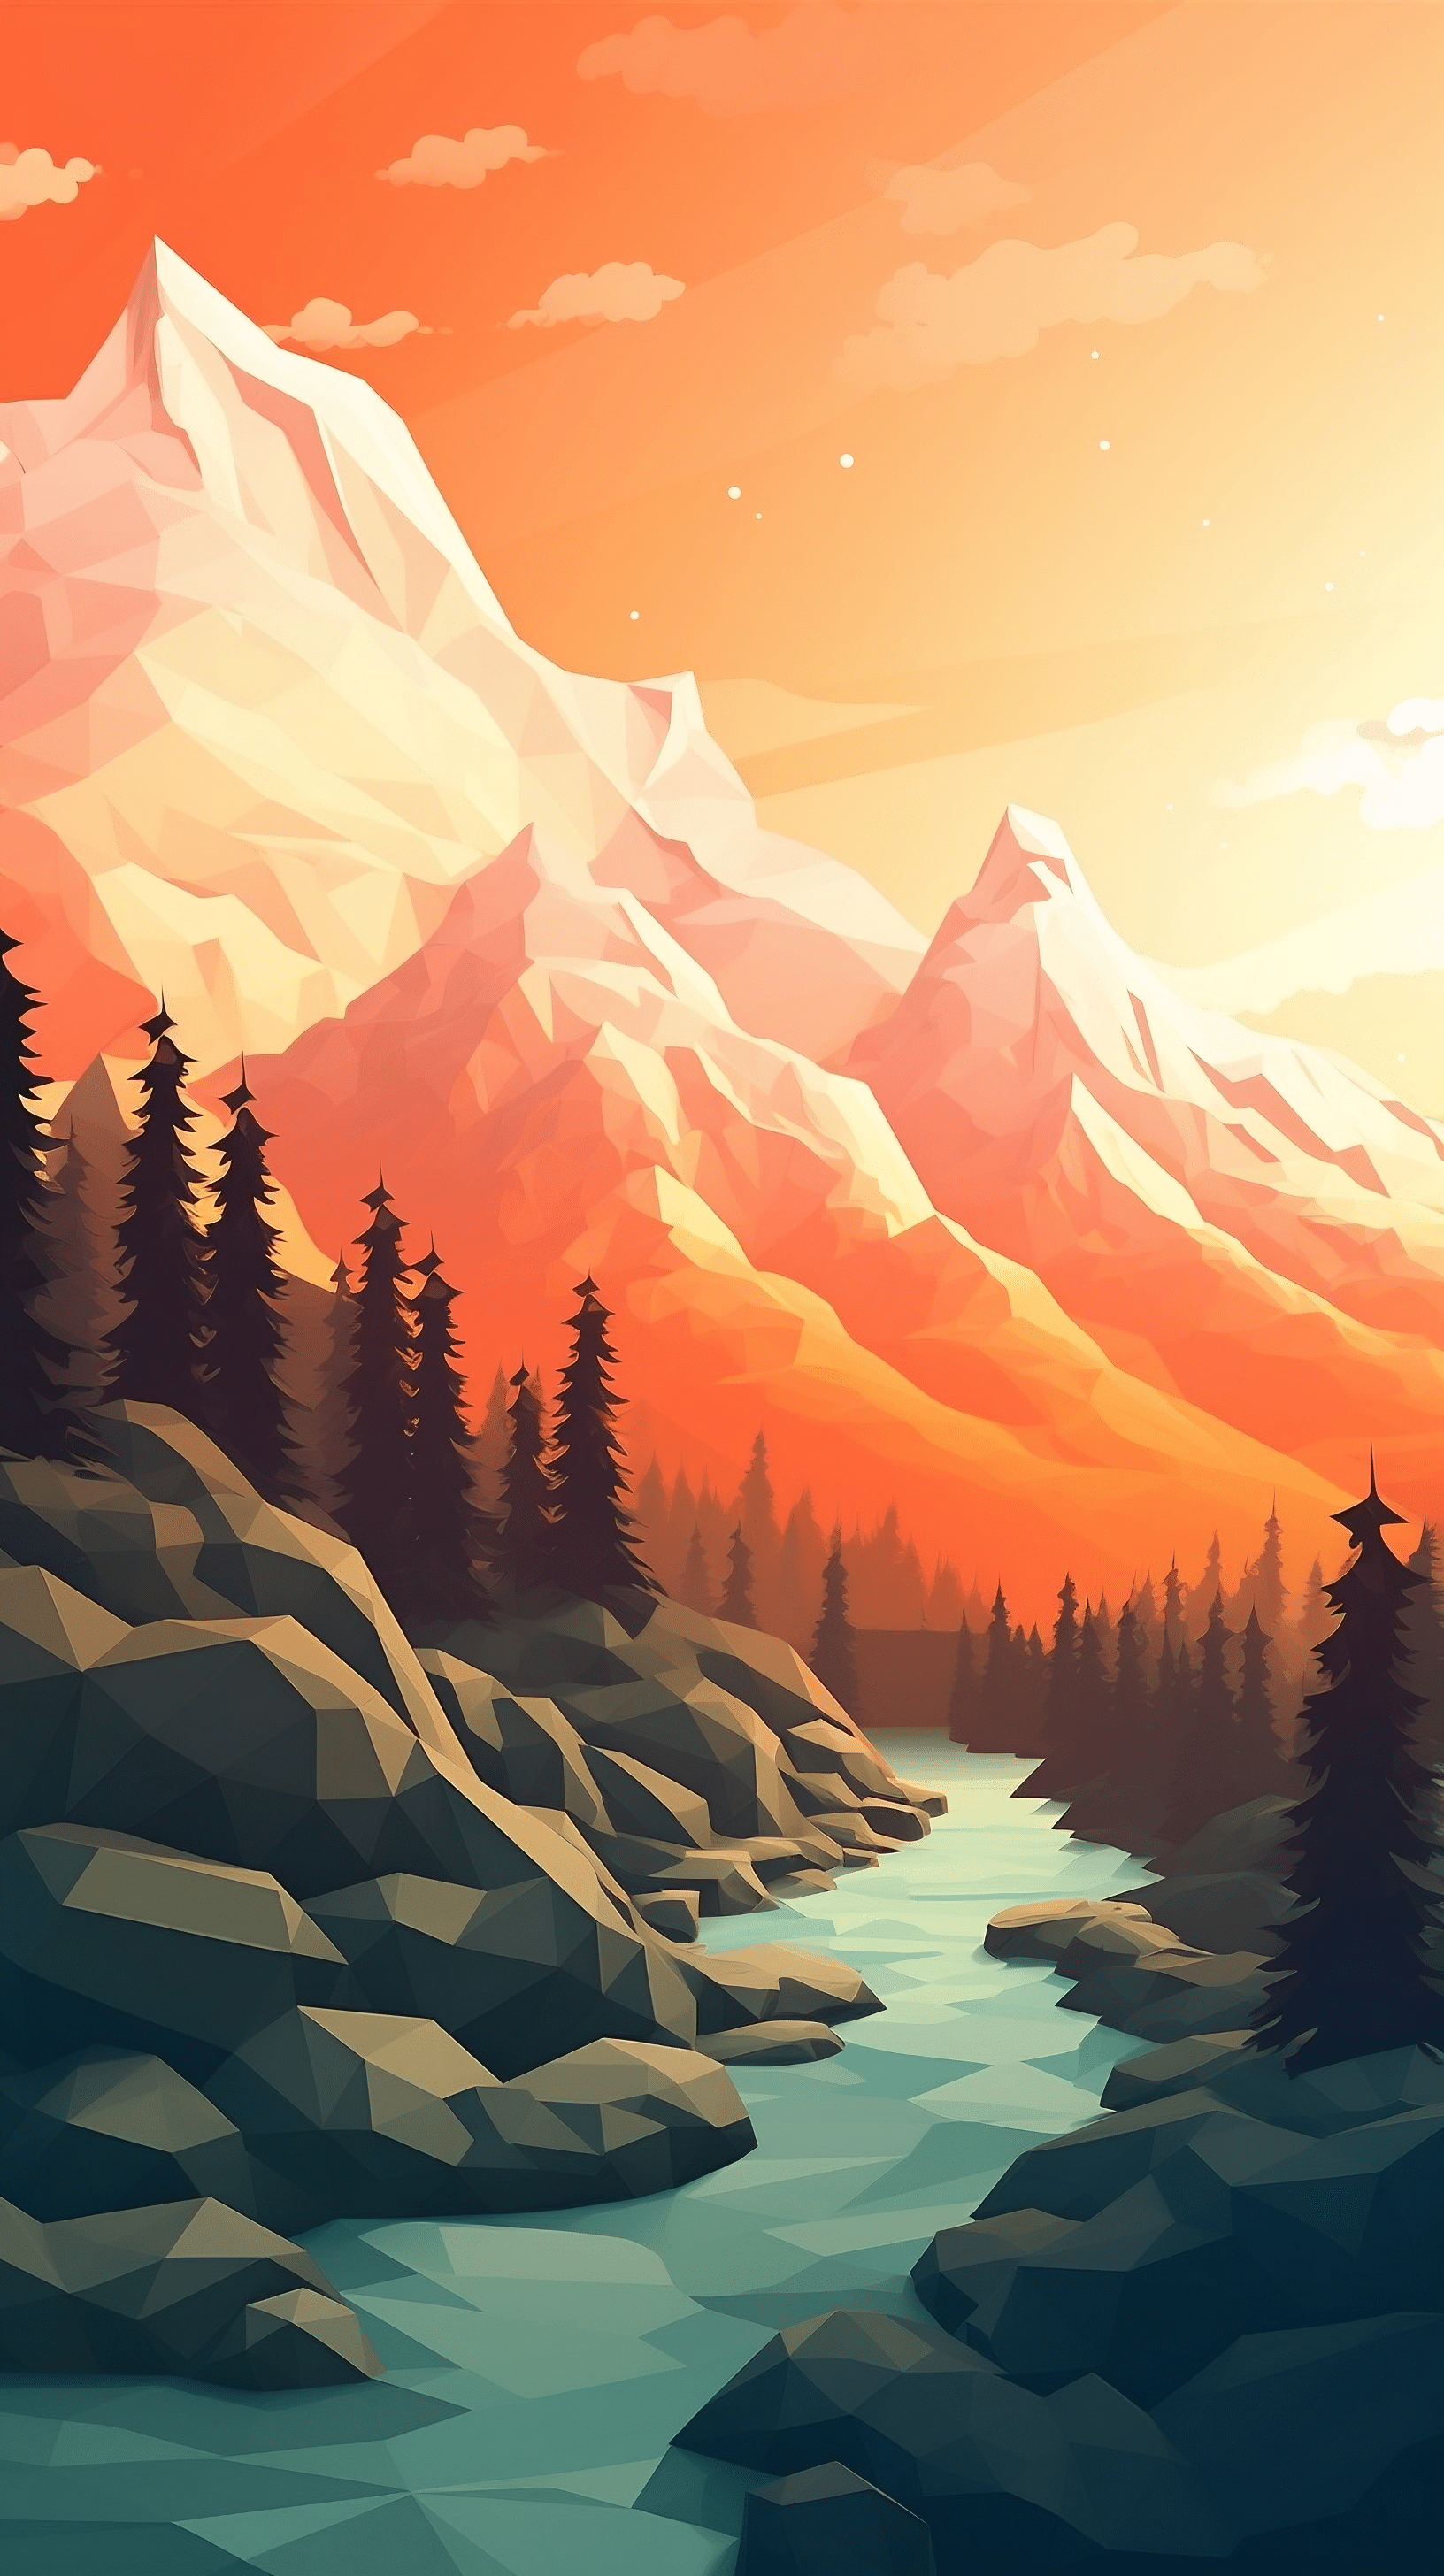 A digital painting of a river running through a mountain valley - Low poly, mountain, landscape, sunset, forest, river